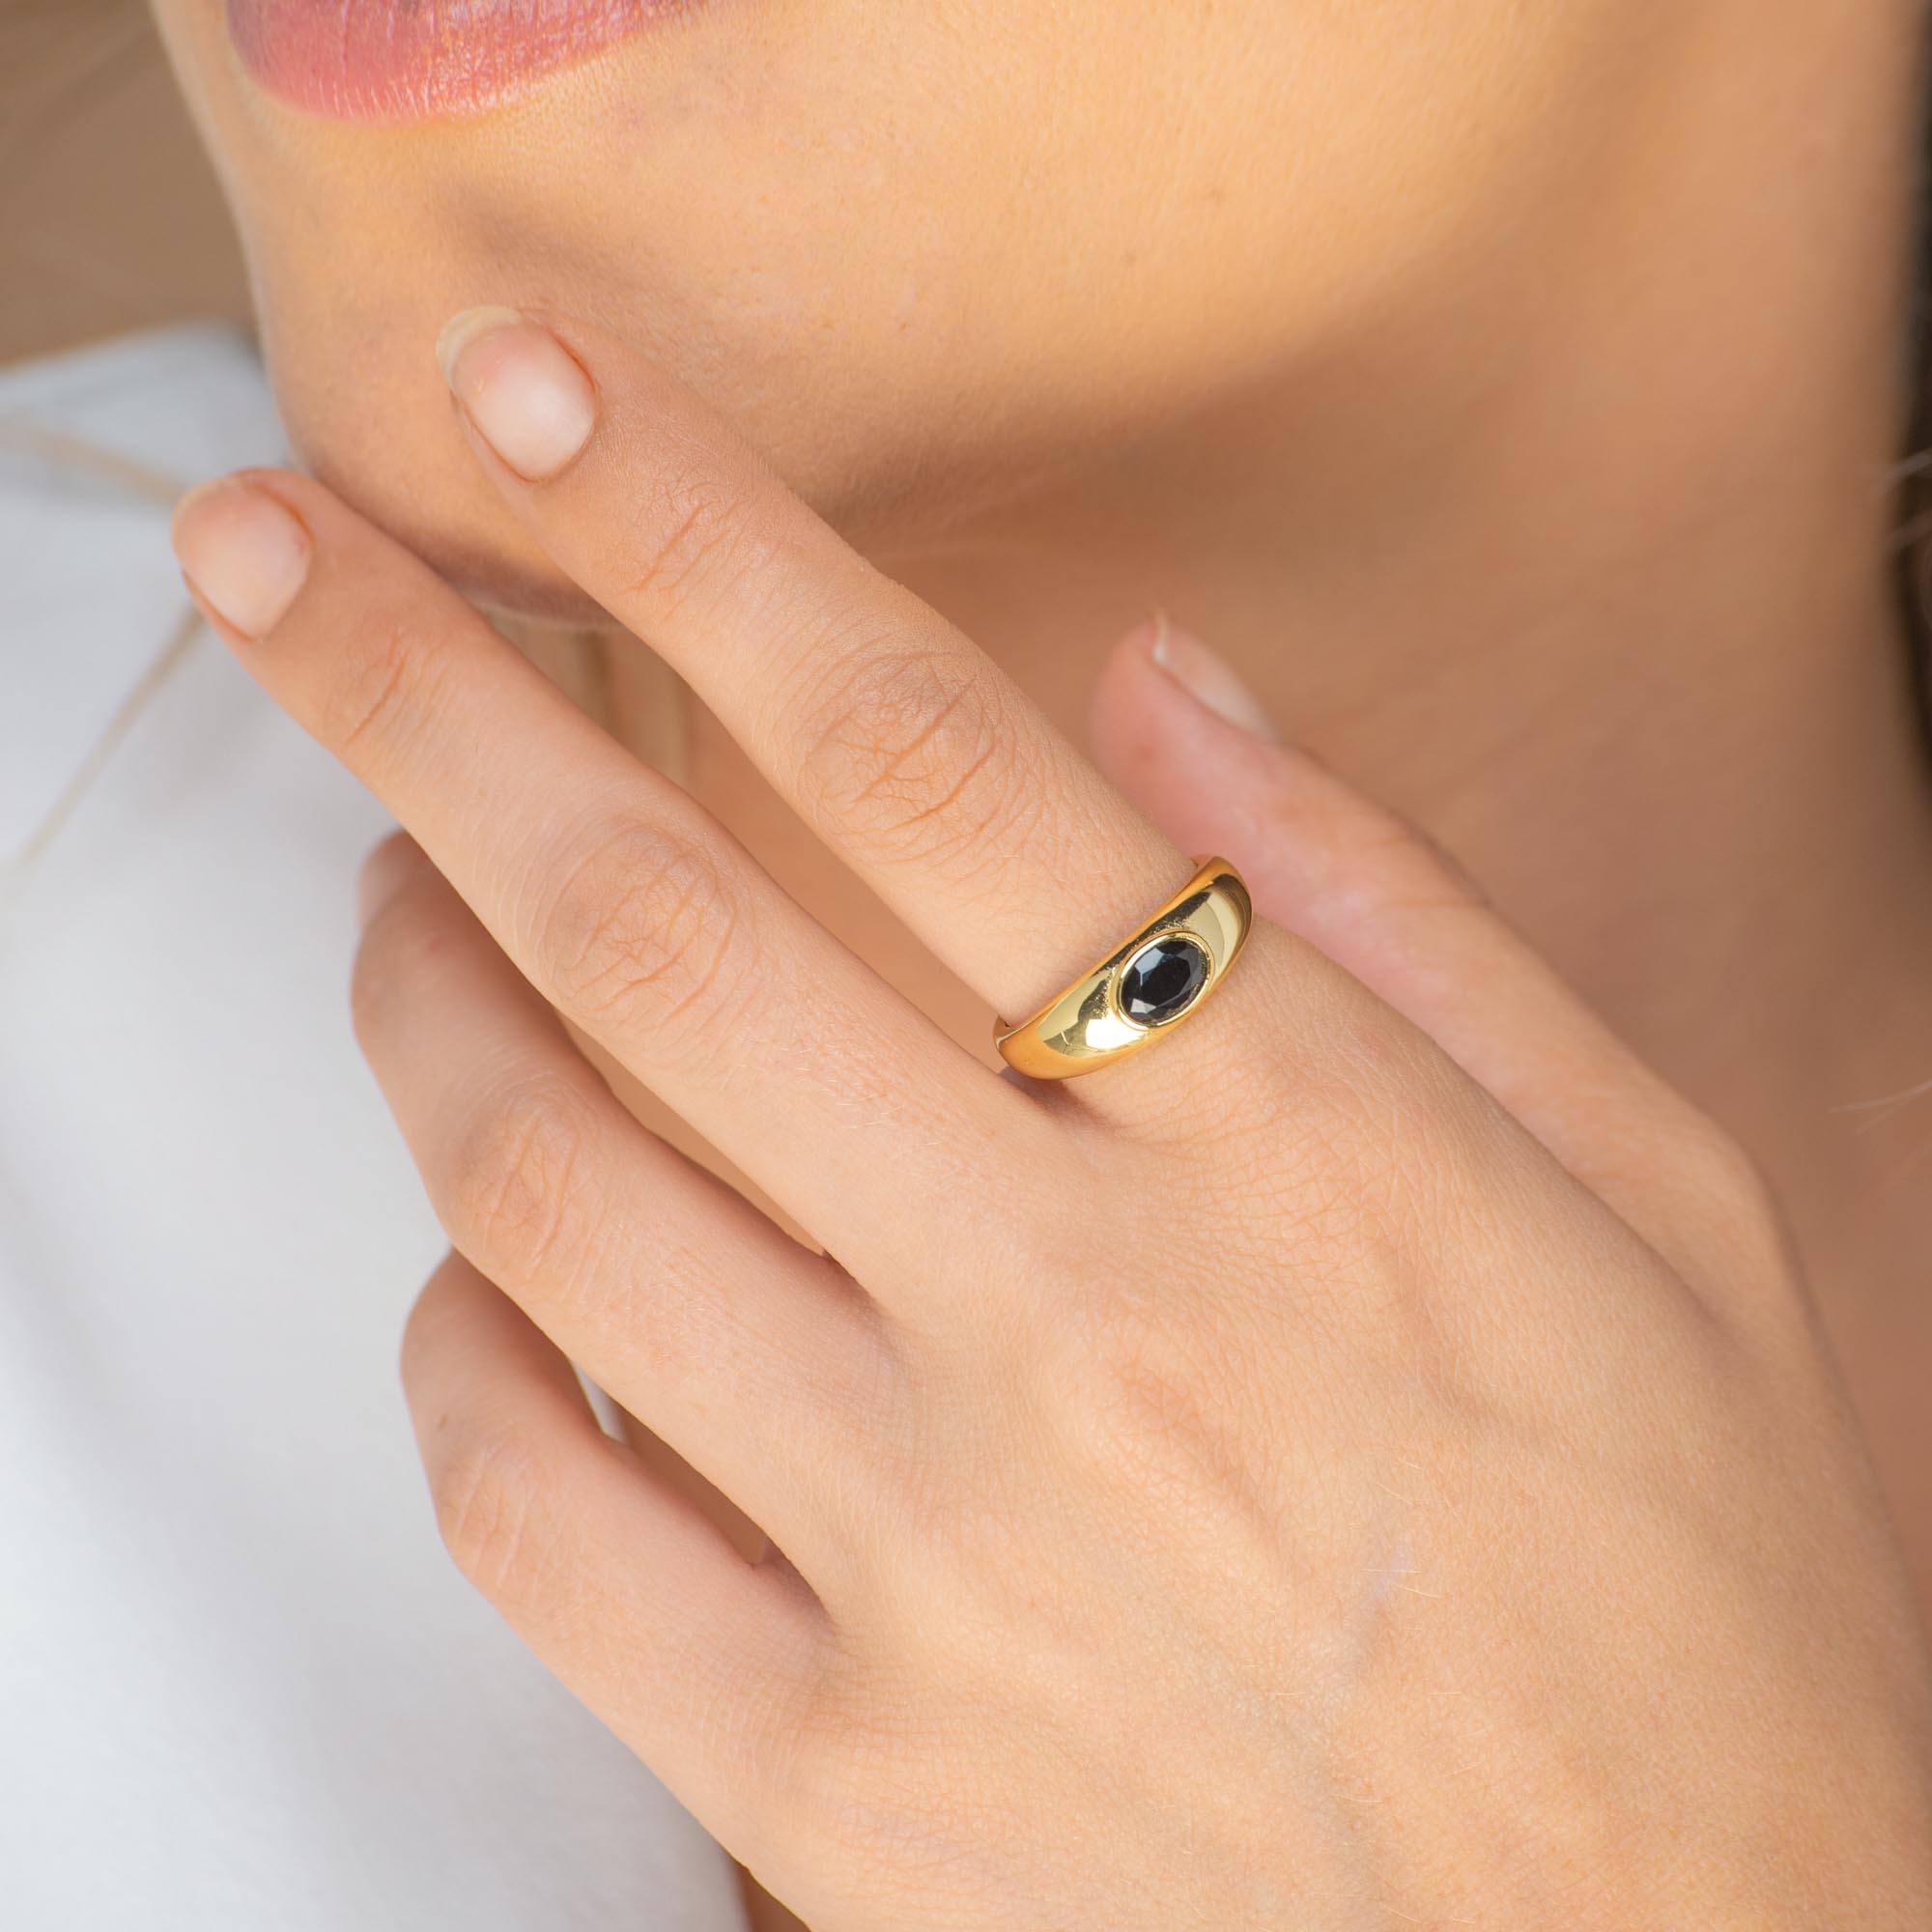 Onyx Signet Dome Open Ring